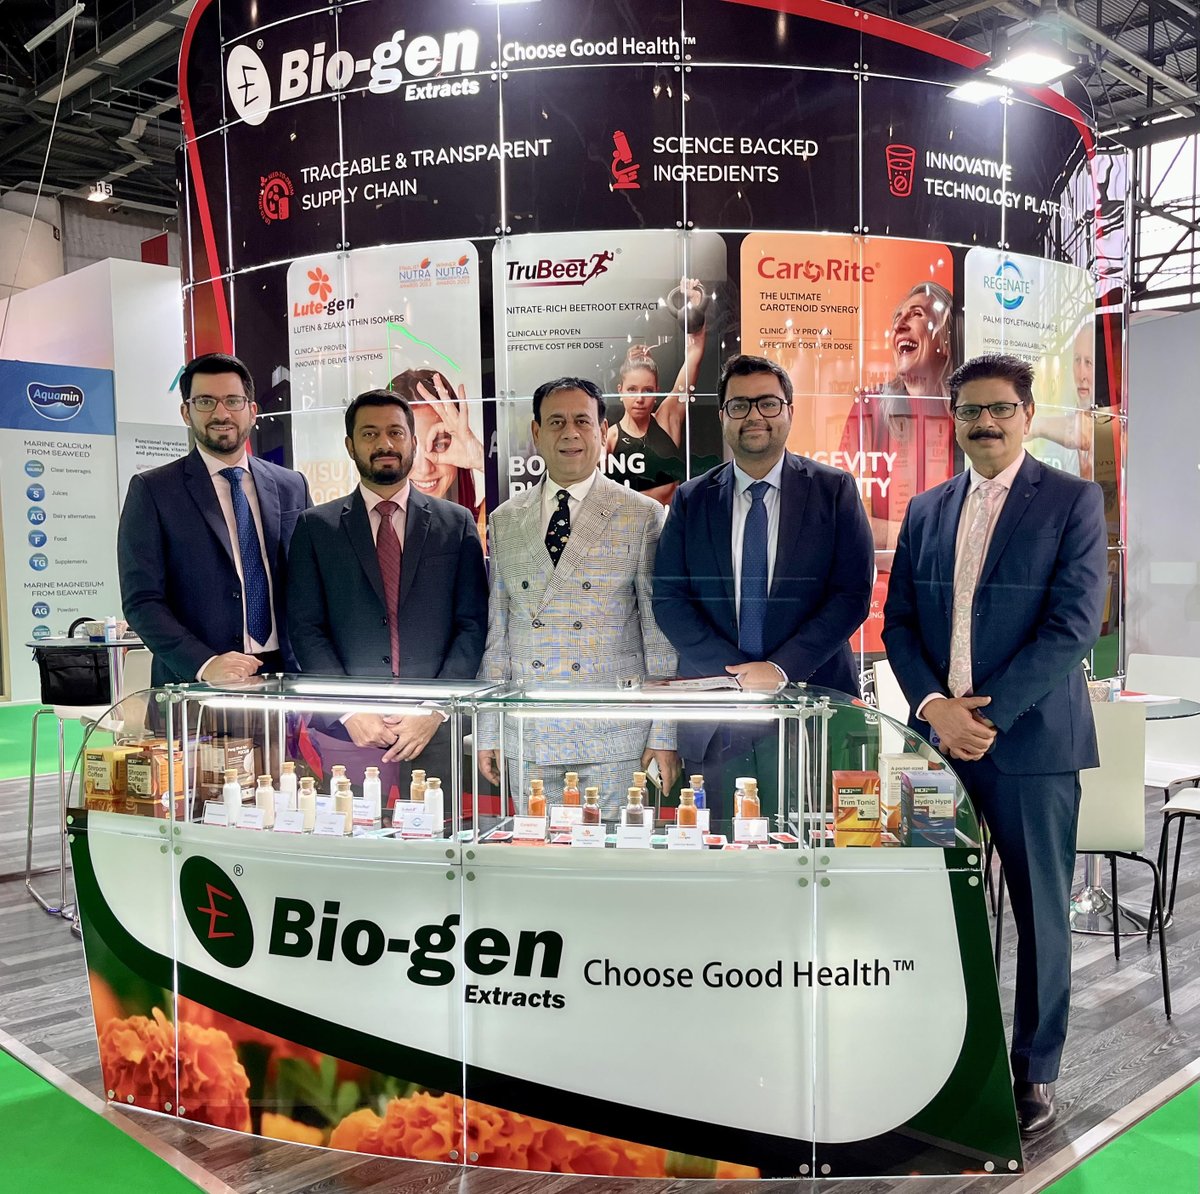 Welcome to Day 2 of Vitafoods Europe 2024!

Head to Stand E34 to discover our latest products, new clinical studies and consumer-centric concepts; developed to help your consumers Choose Good Health™.

Team Bio-gen Extracts await you!

#BioGenExtracts  #VitafoodsEurope